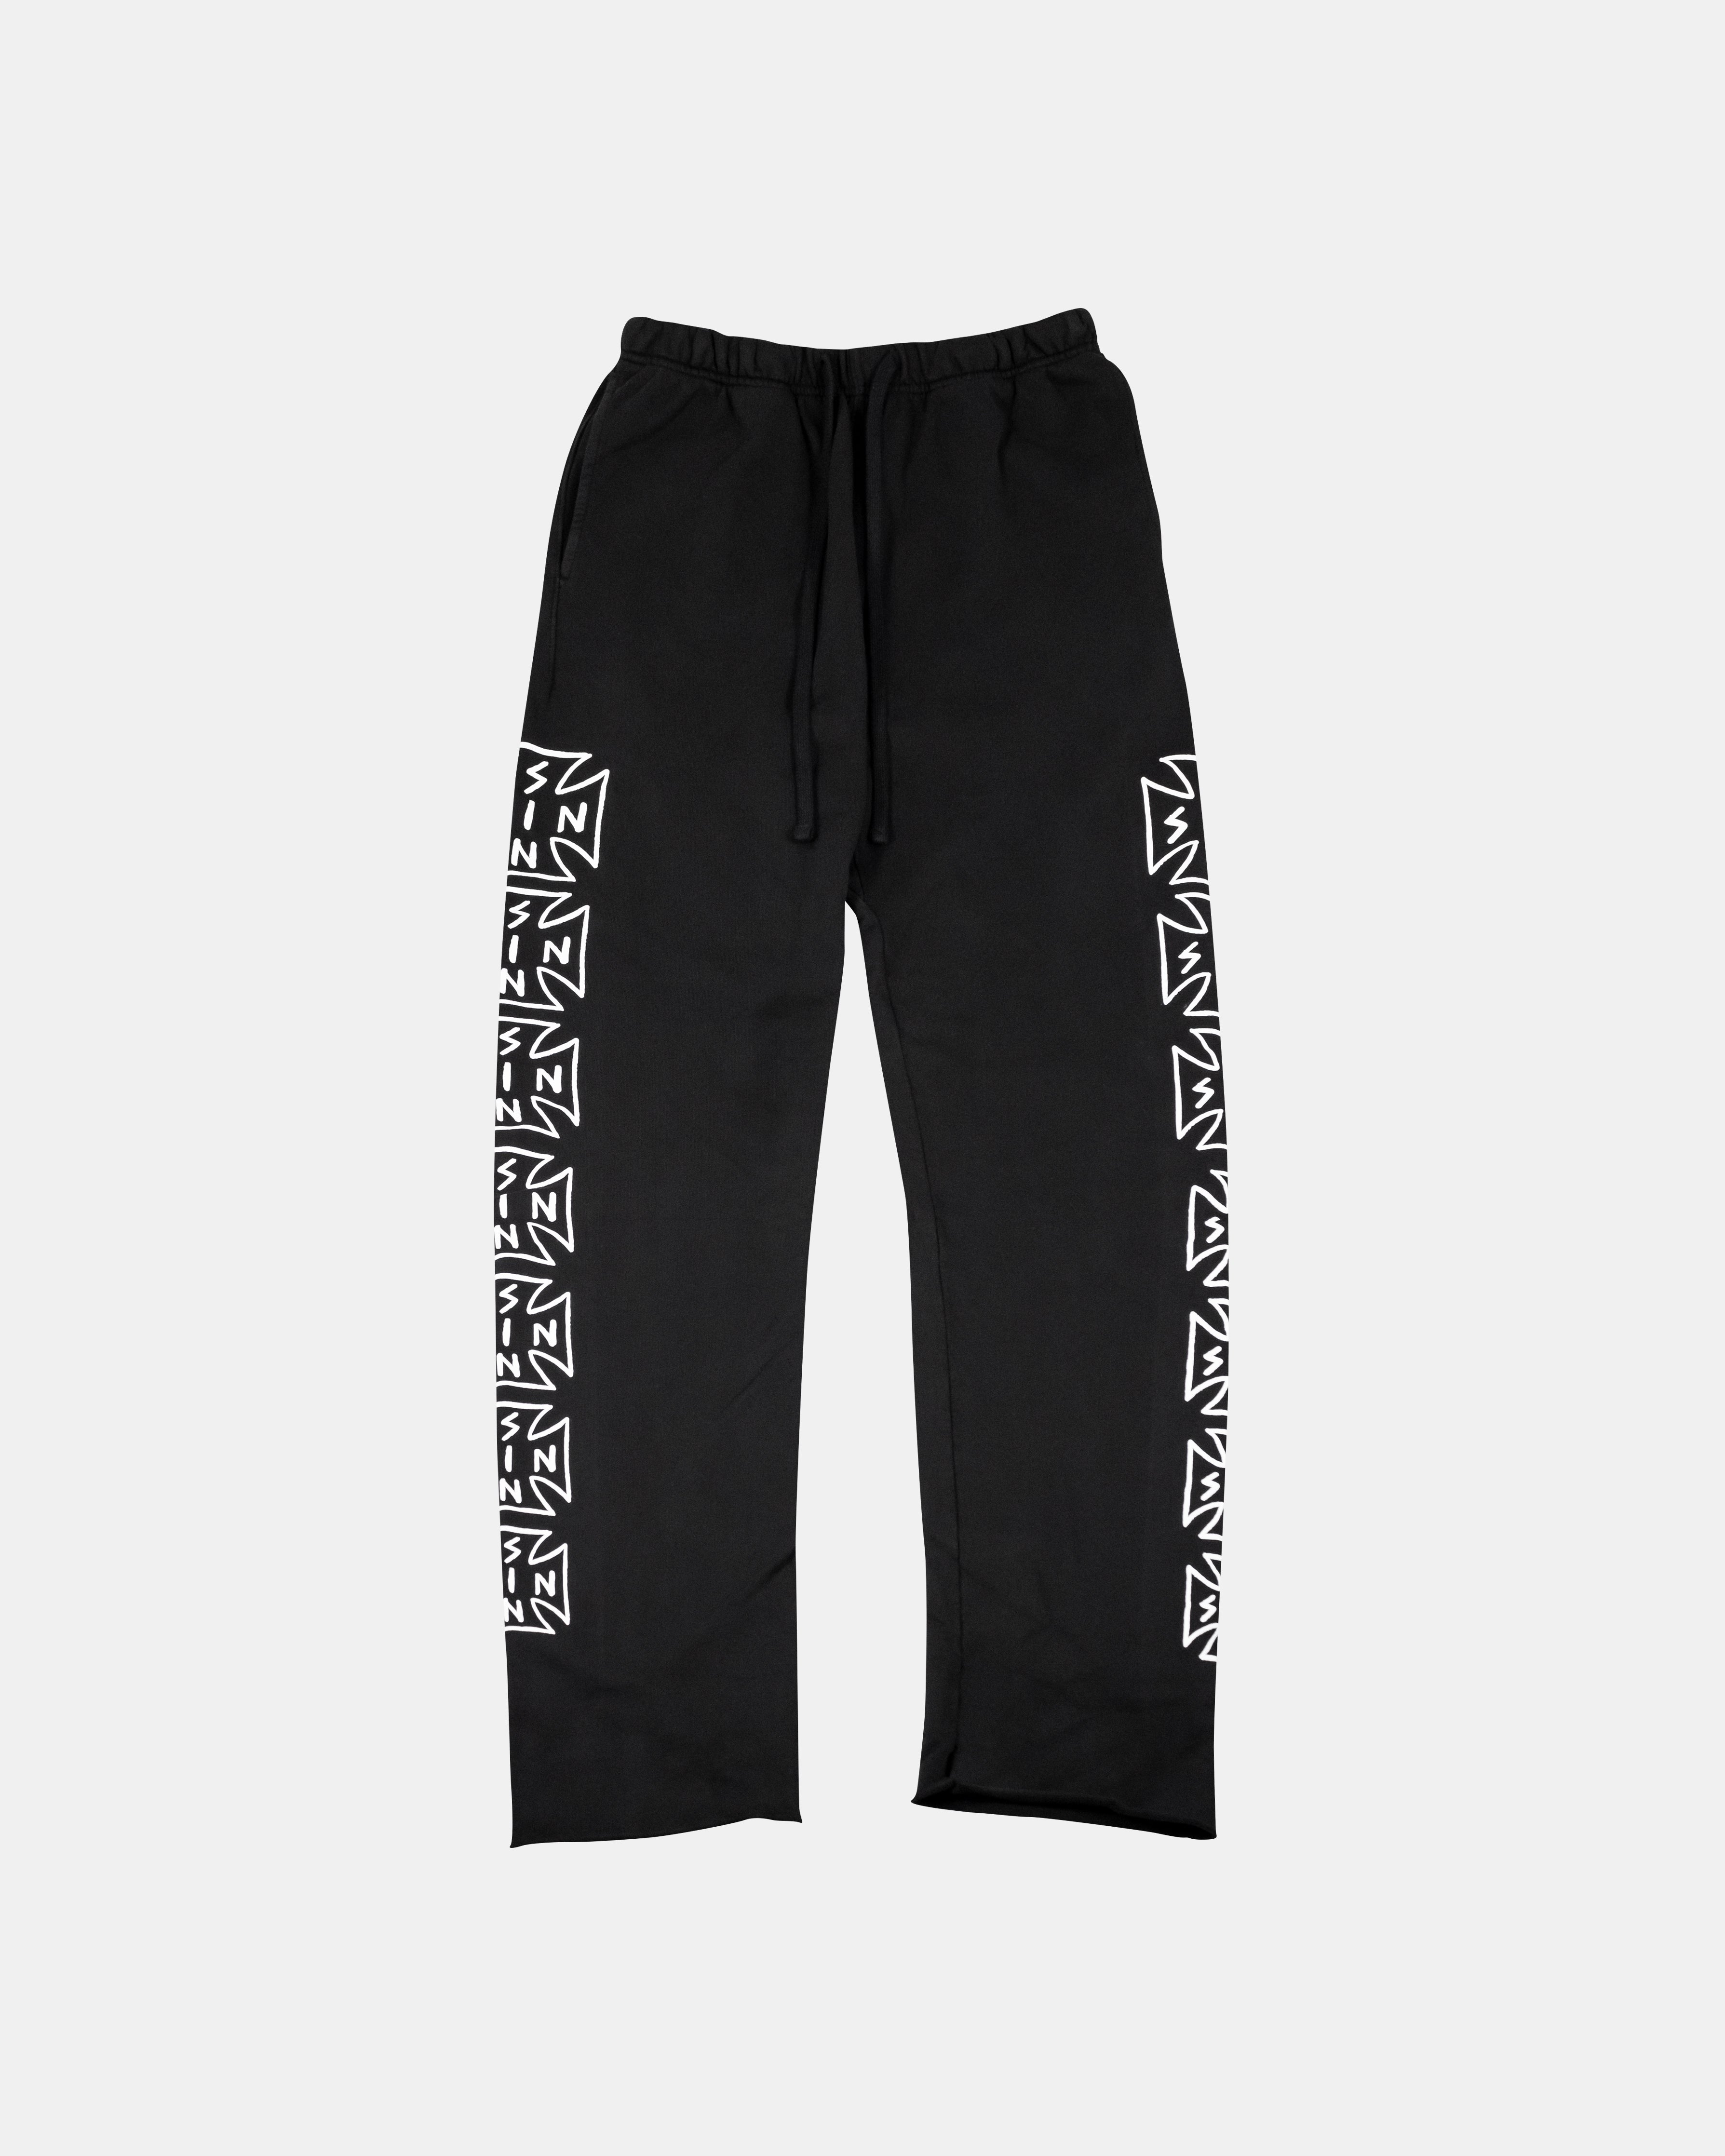 WEST COAST SINNER SWEAT PANTS – For Those Who Sin